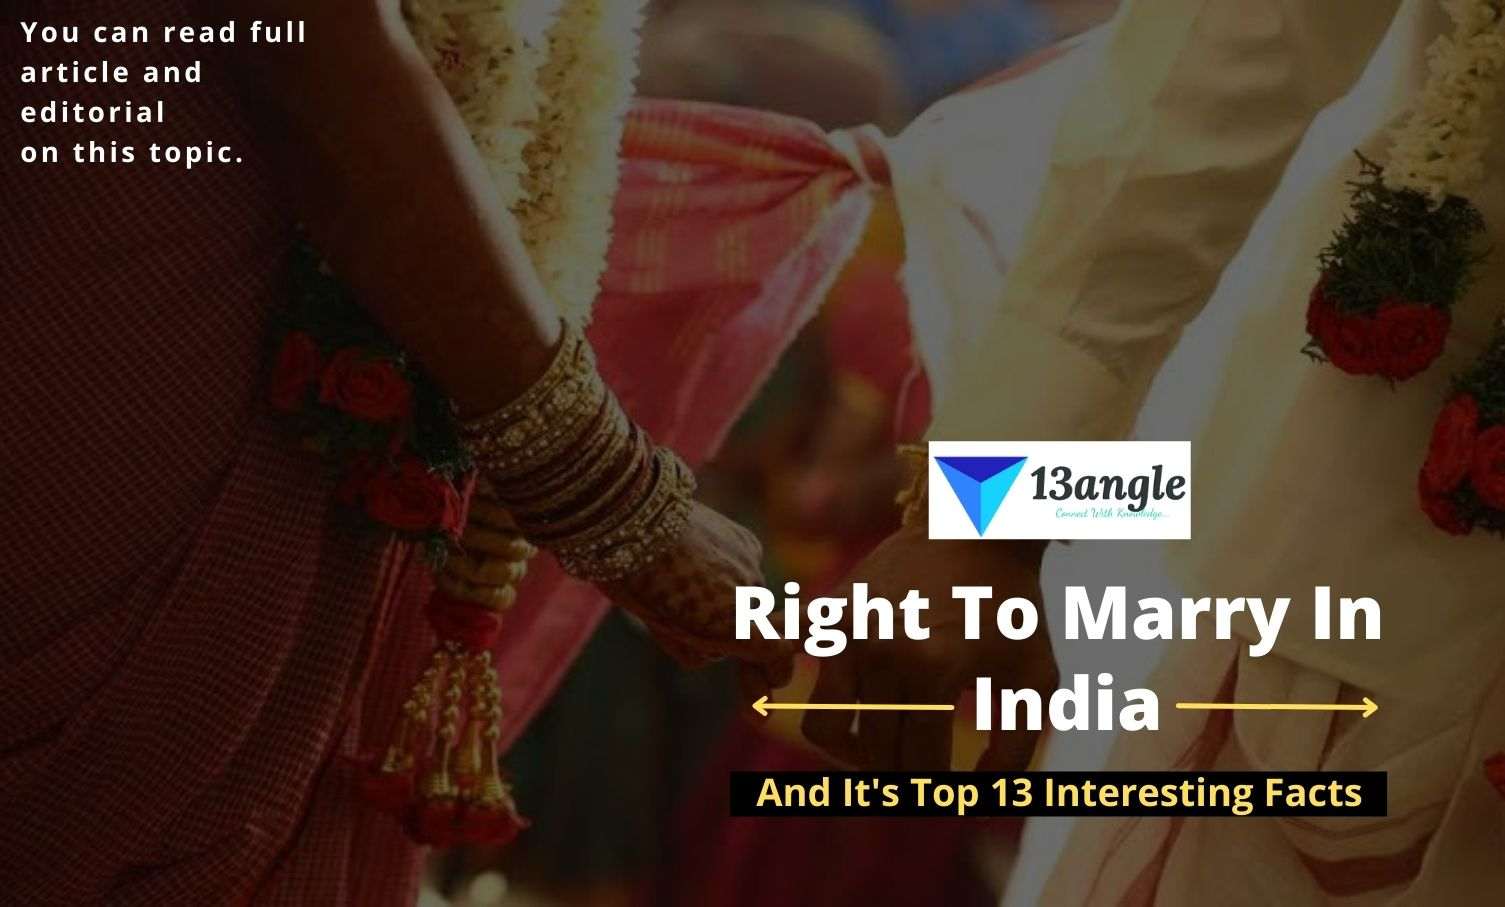 Right To Marry In India- 13angle.com